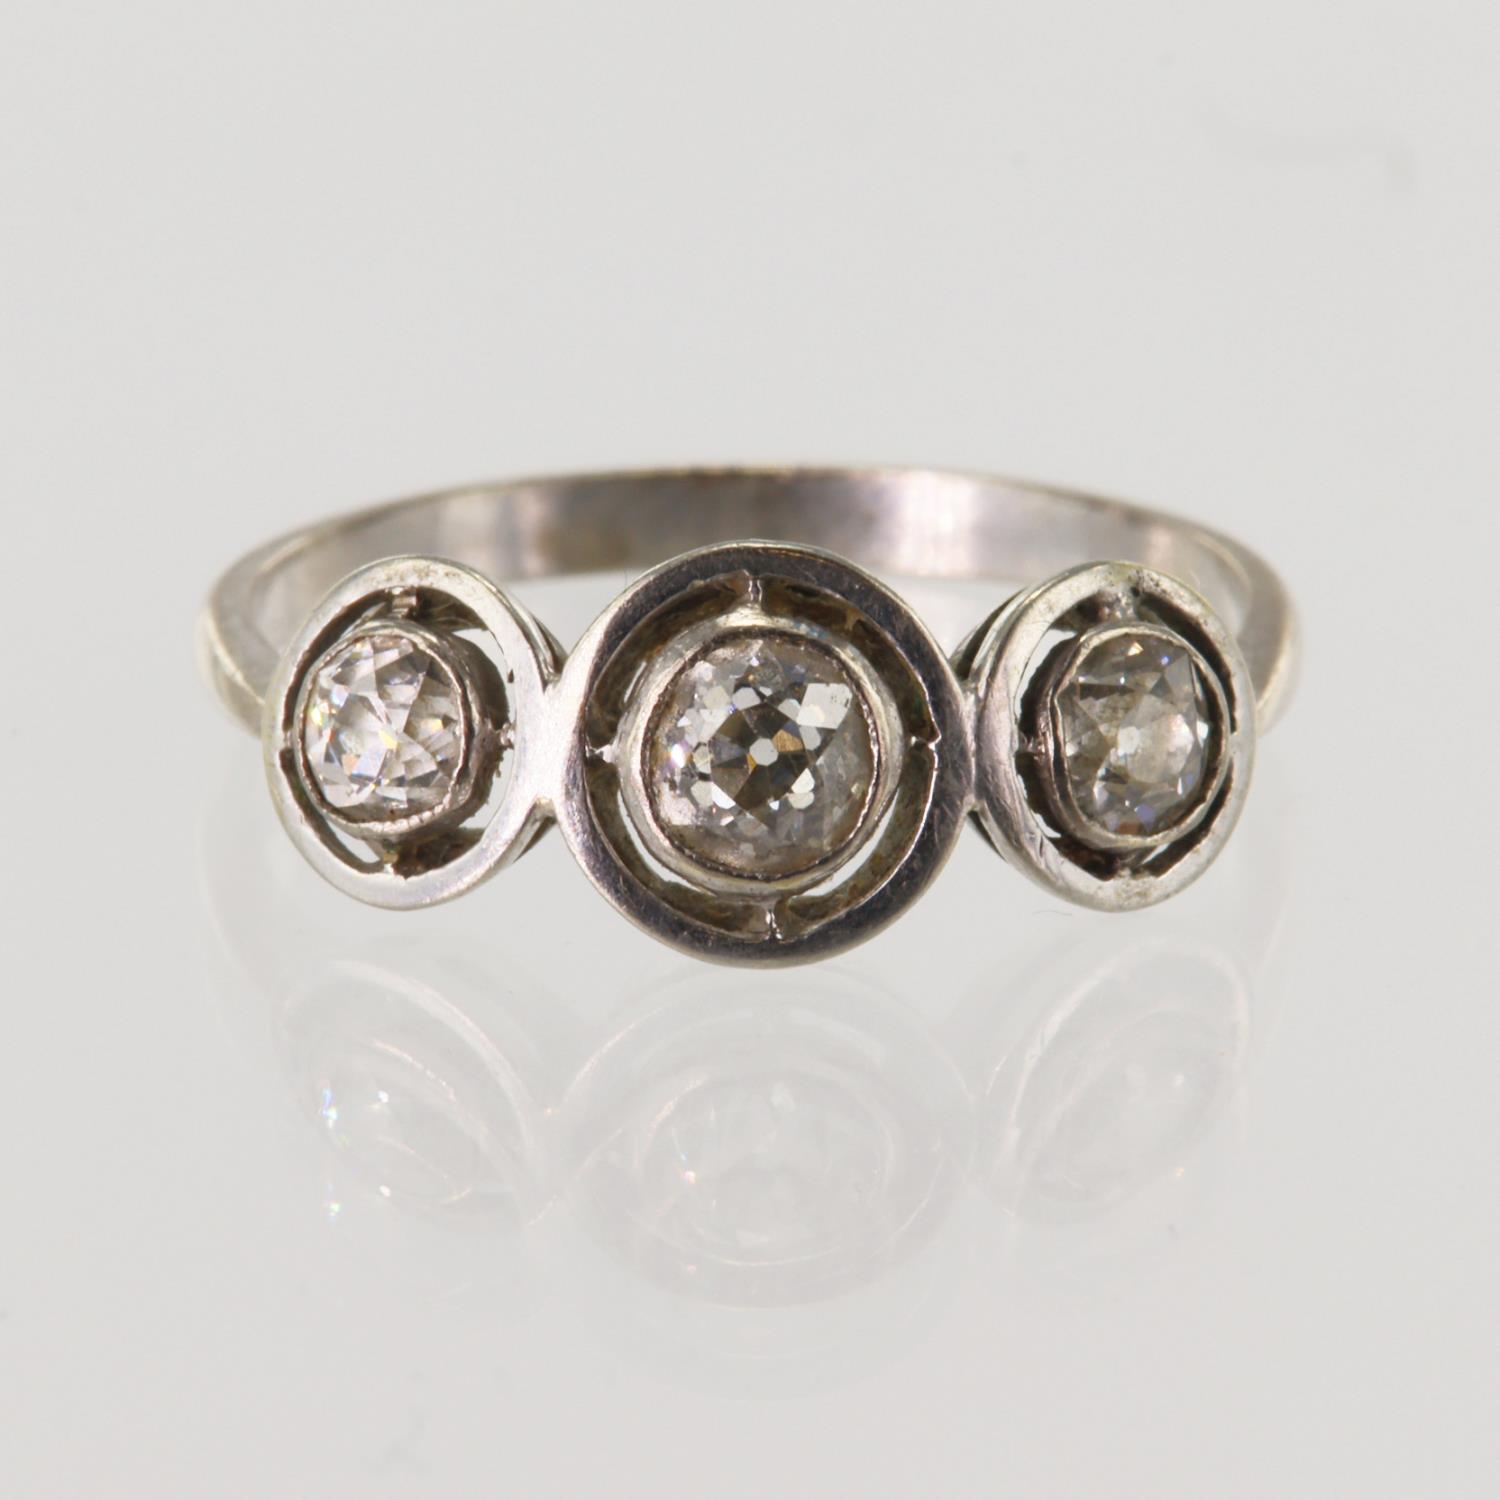 White metal diamond trilogy ring, set with three graduated round old cut diamonds calculated as